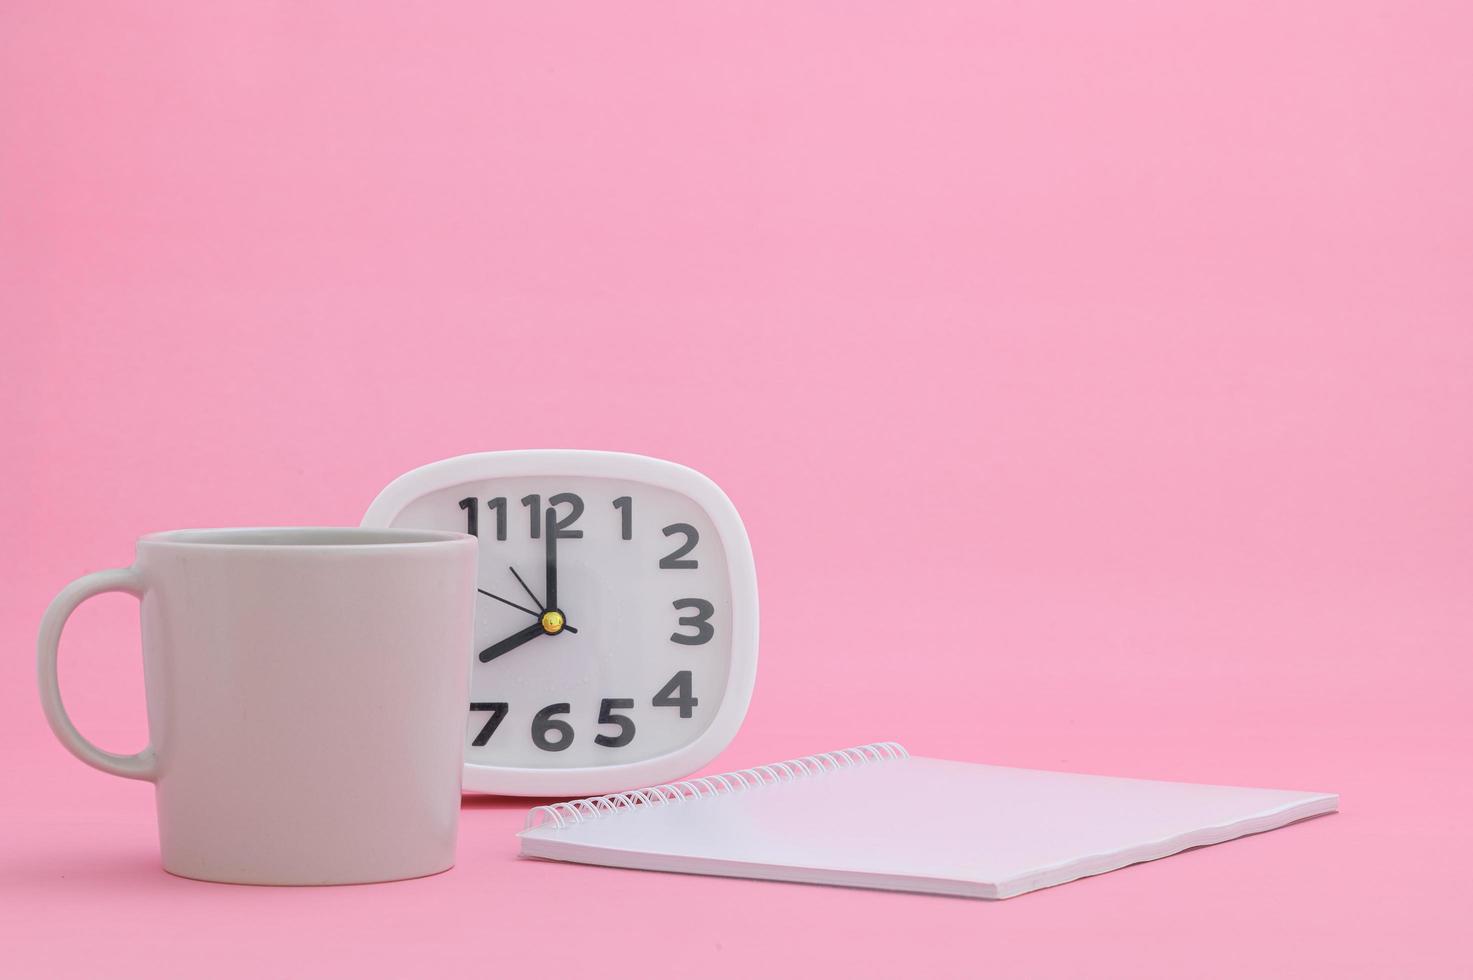 Notepad and cup on pink background photo